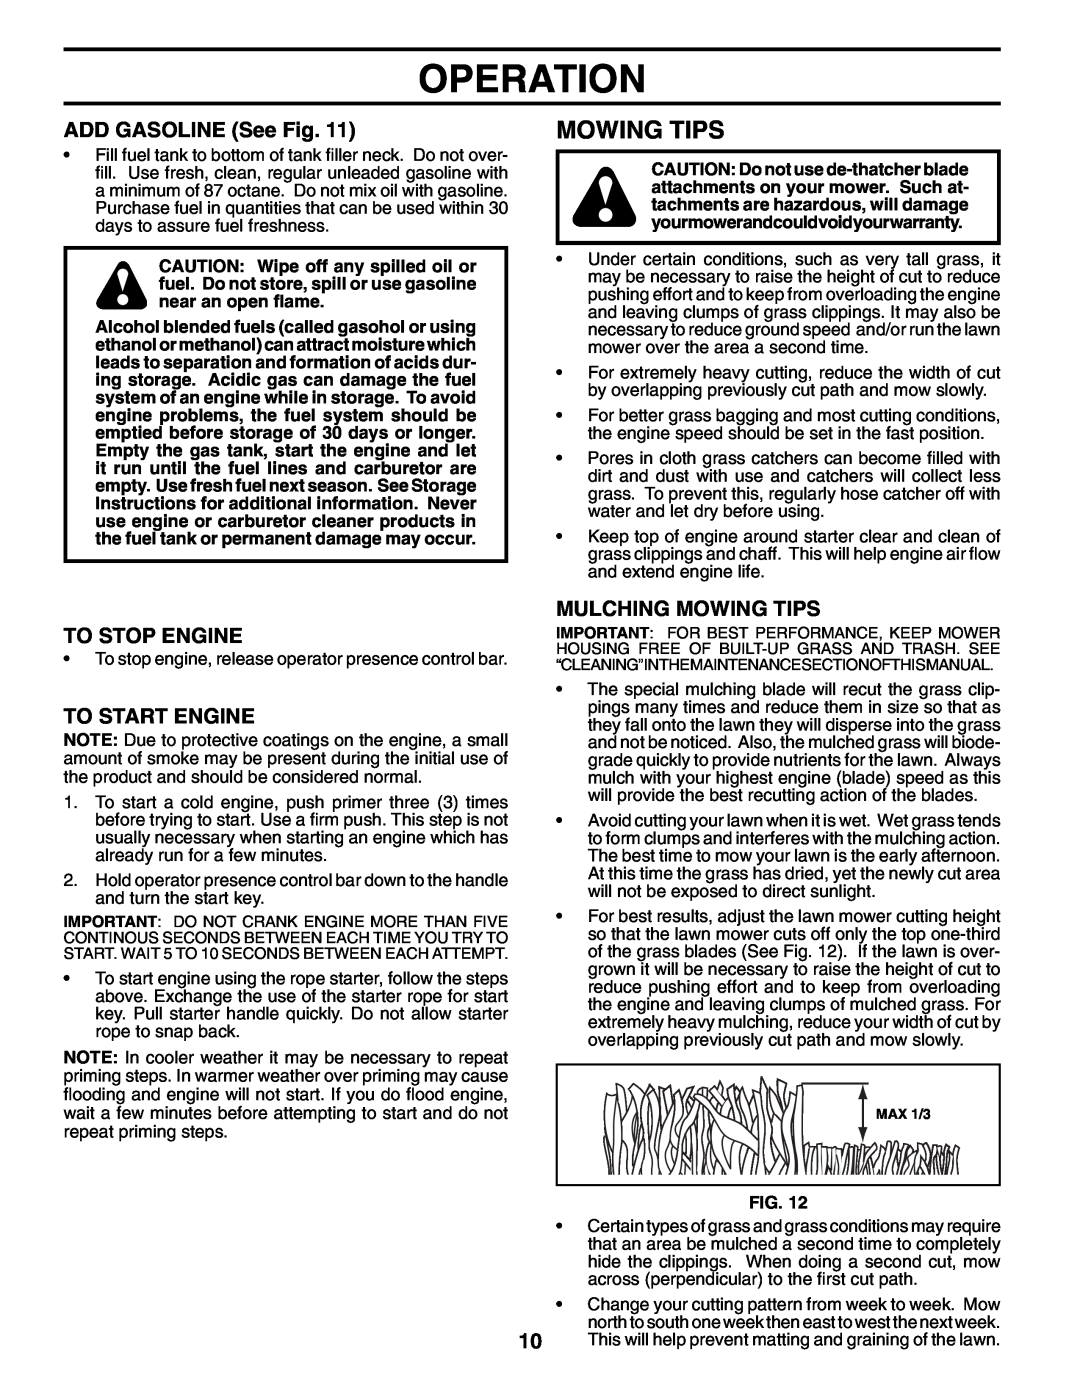 Husqvarna 87521RES owner manual ADD GASOLINE See Fig, To Stop Engine, To Start Engine, Mulching Mowing Tips, Operation 